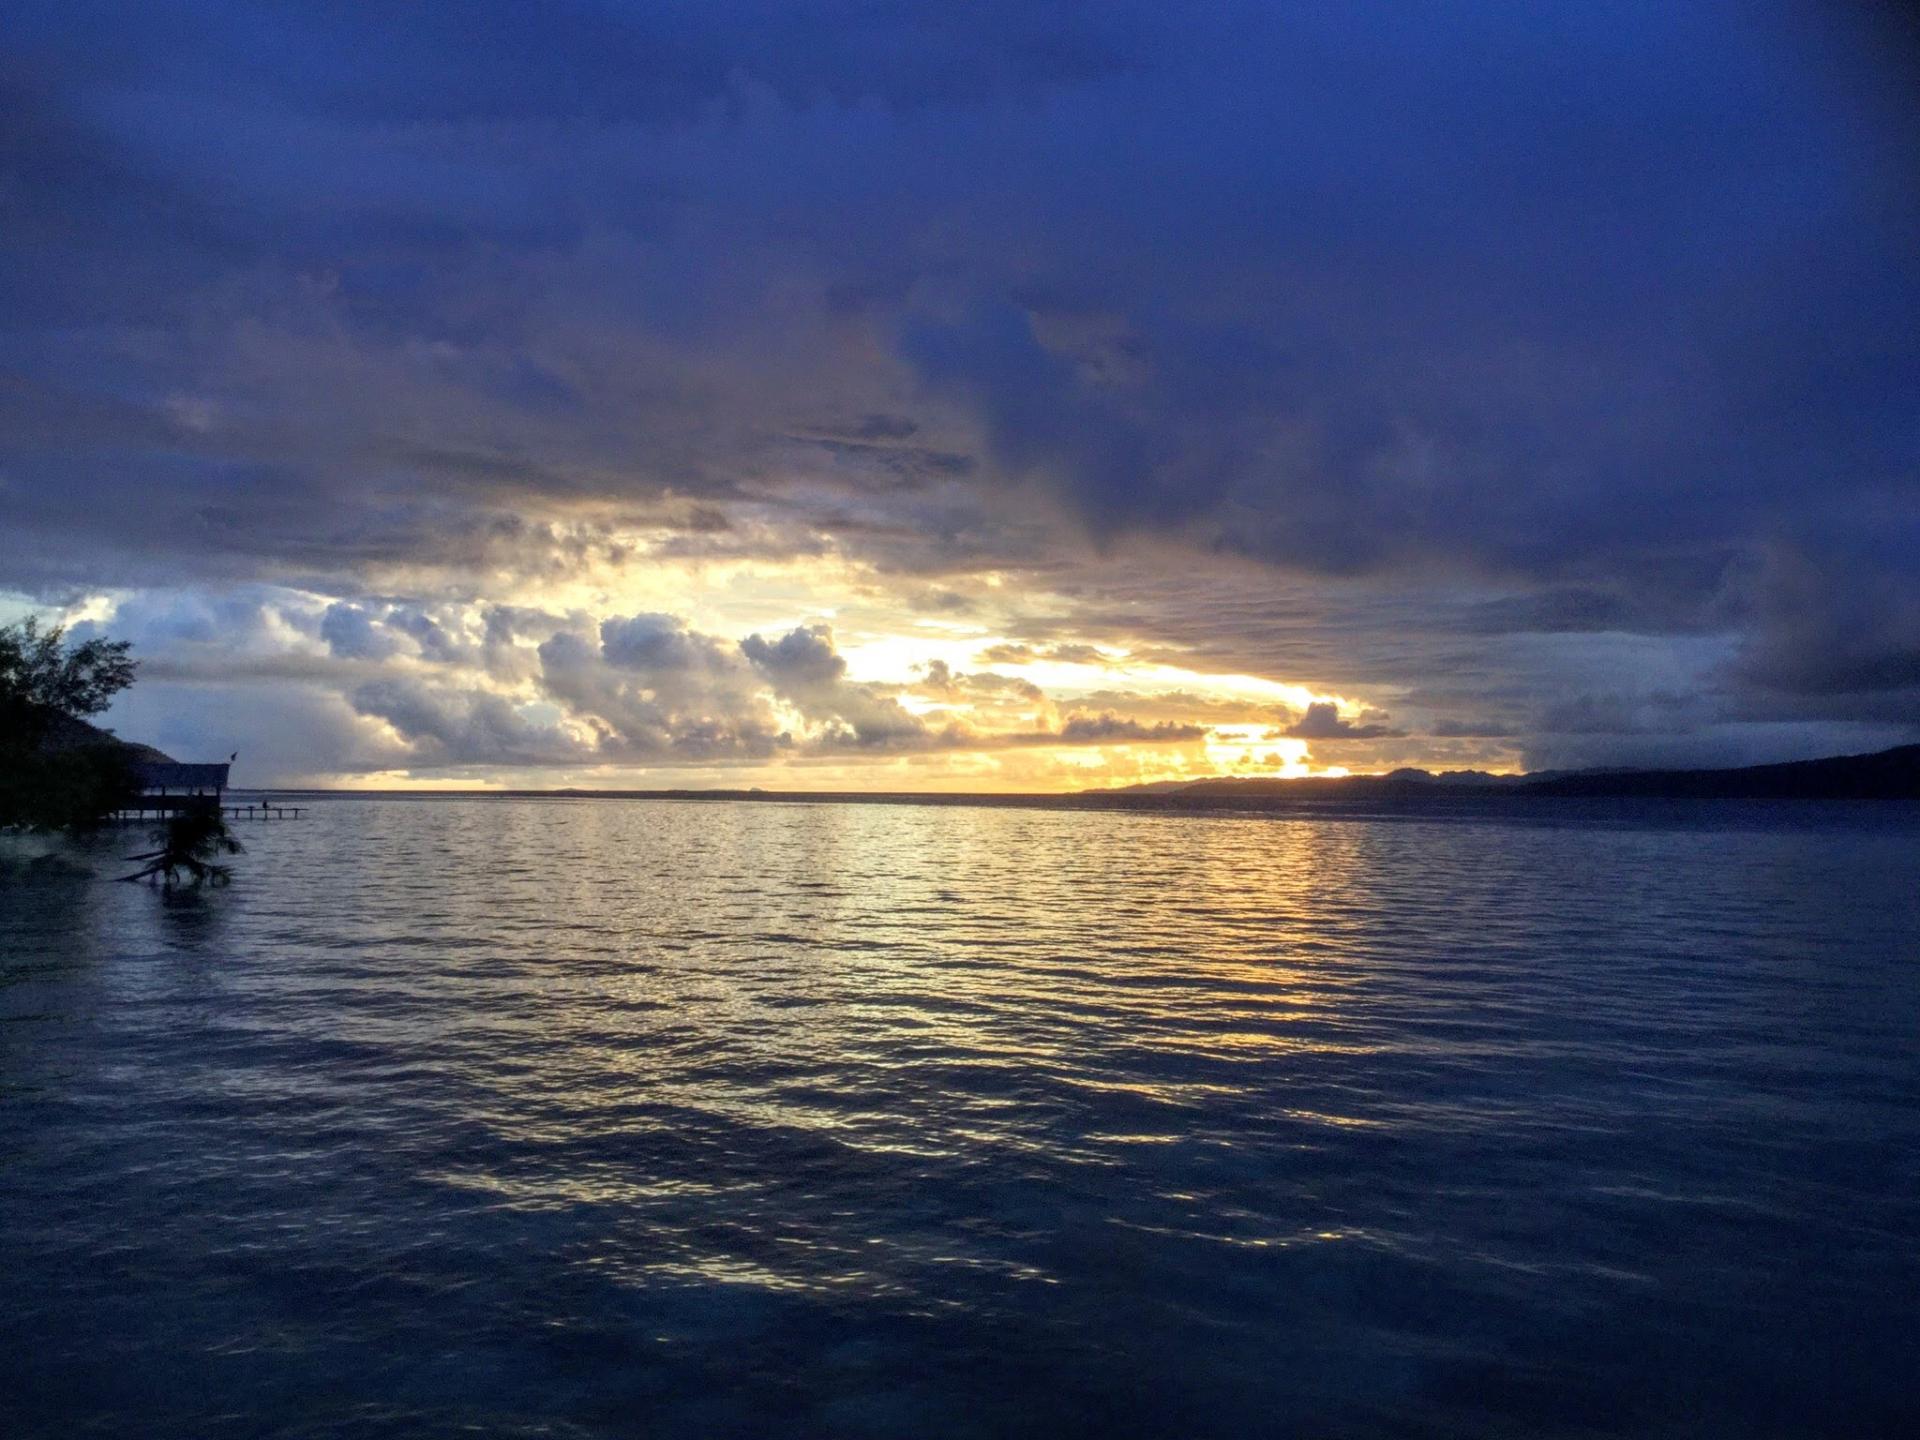 First sunset from Raja Ampat